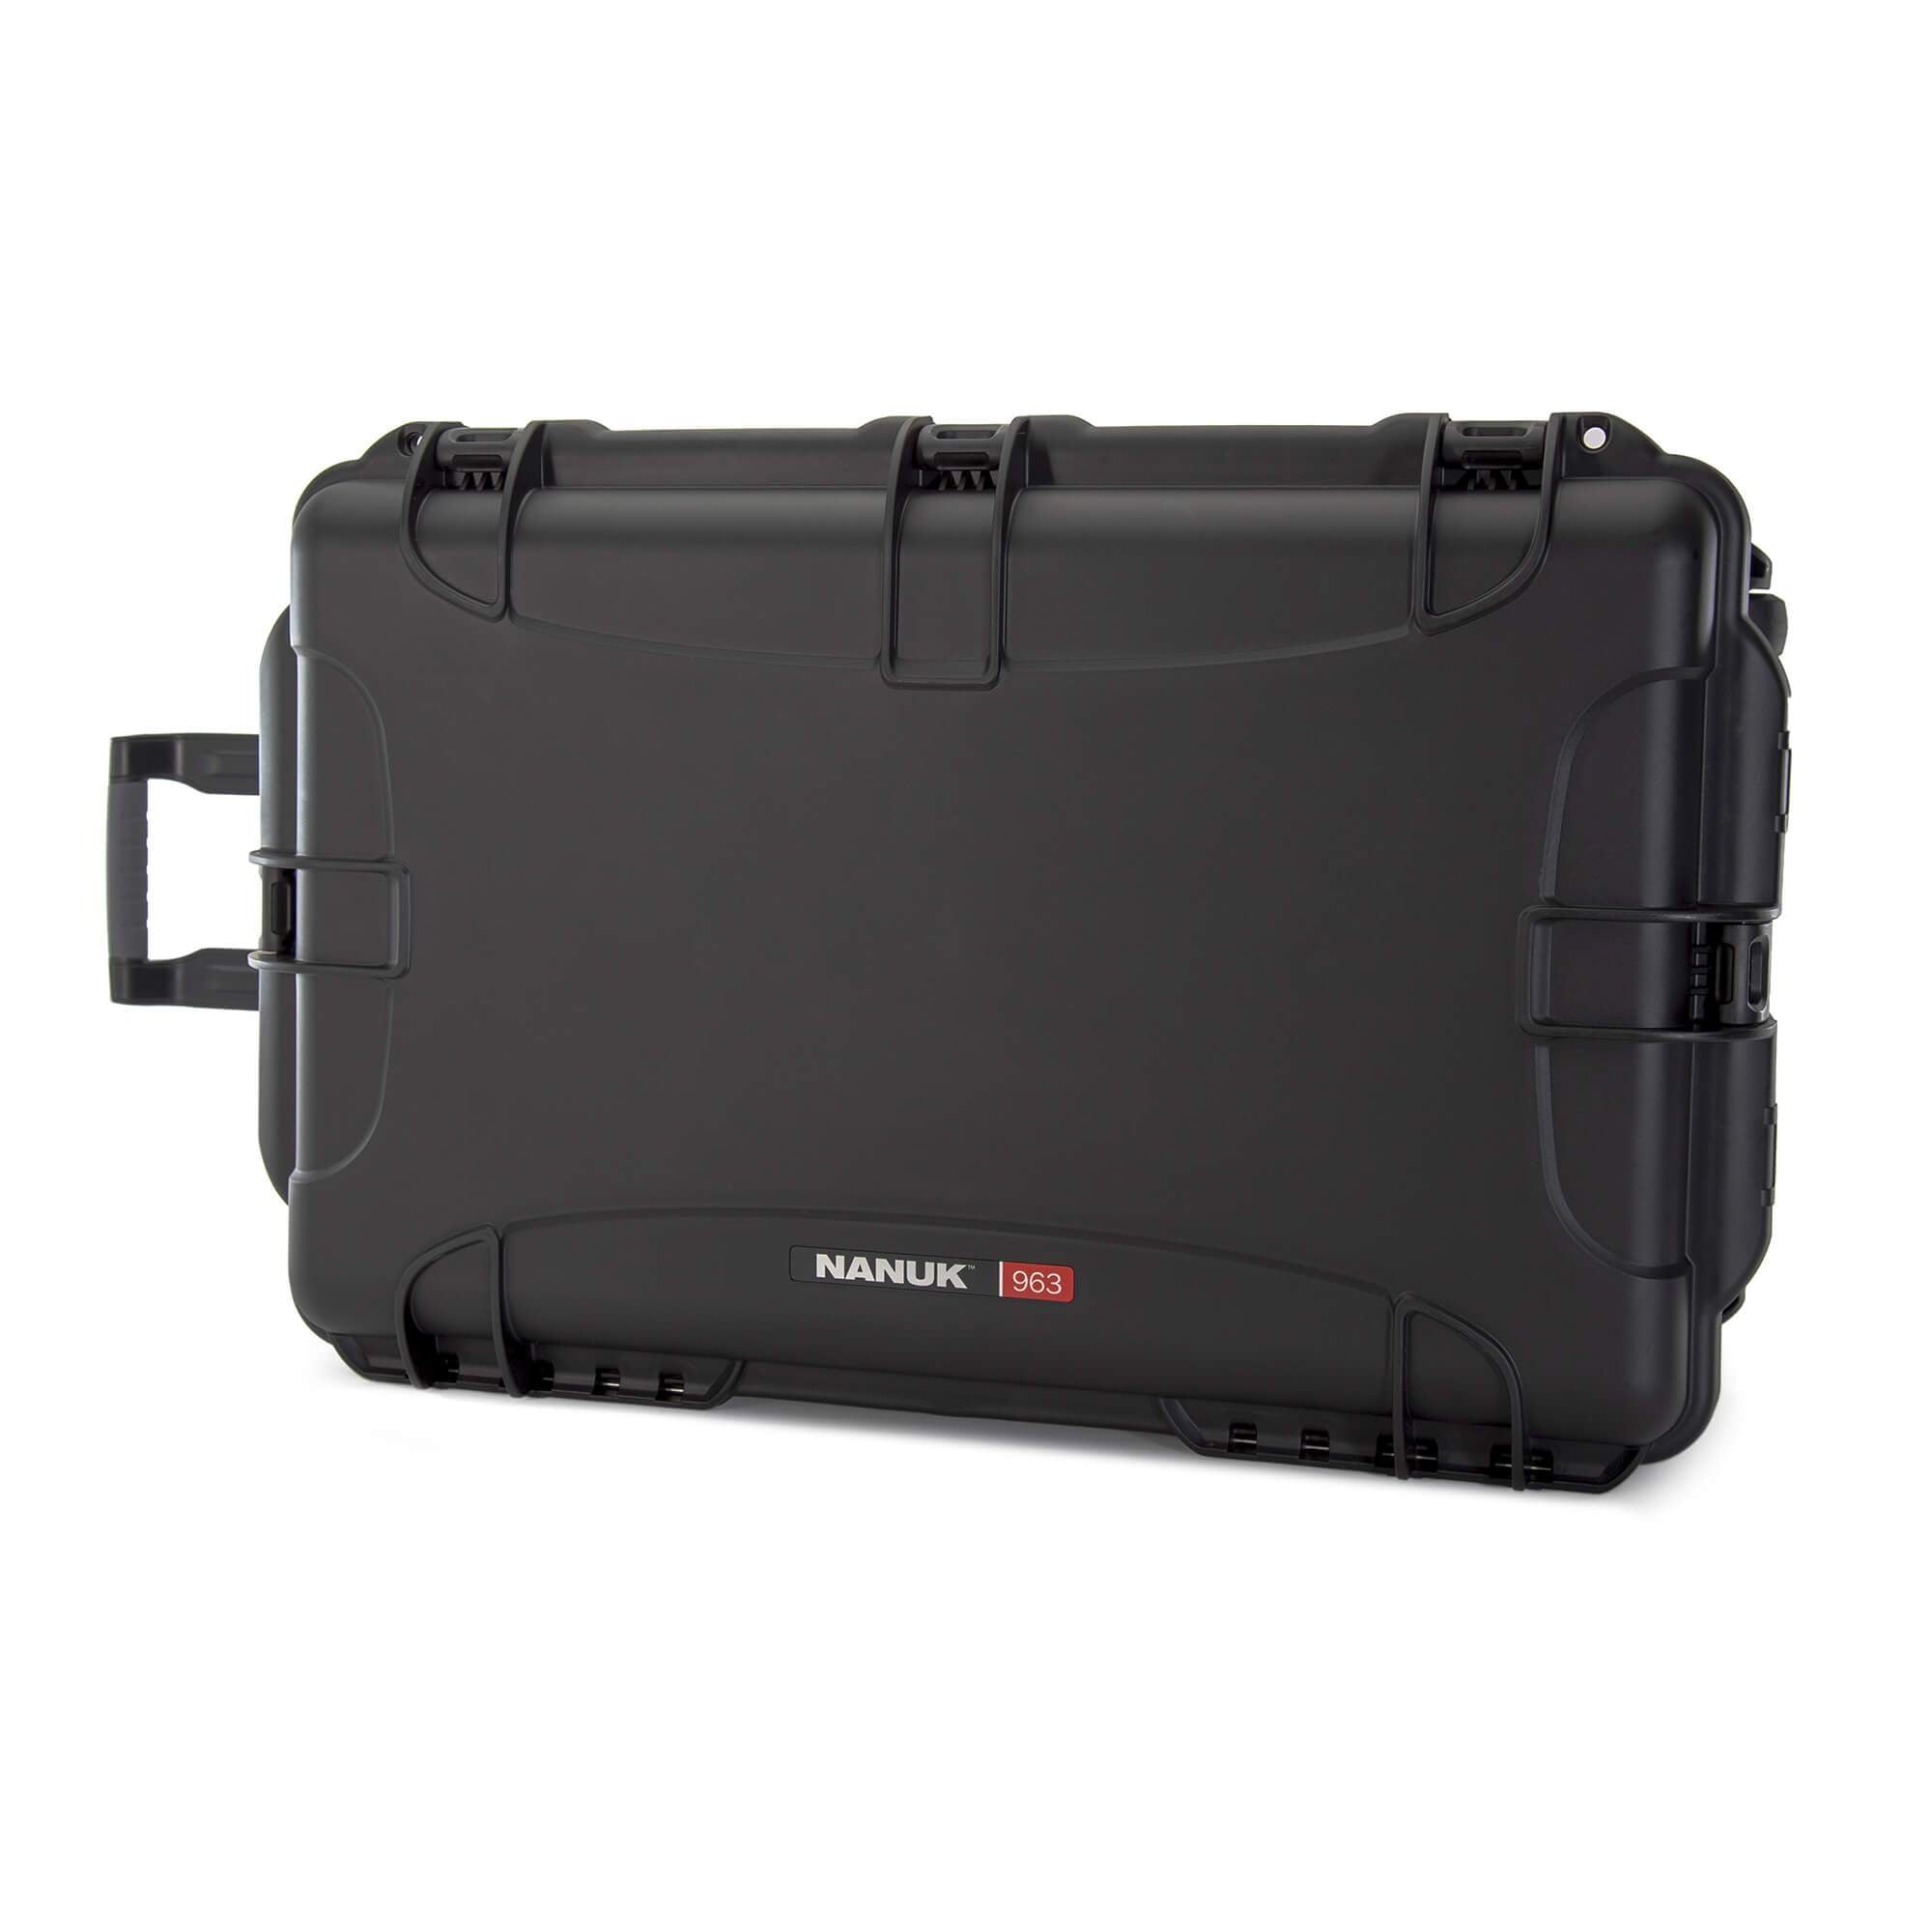 Nanuk 963 front angle with retractable handle